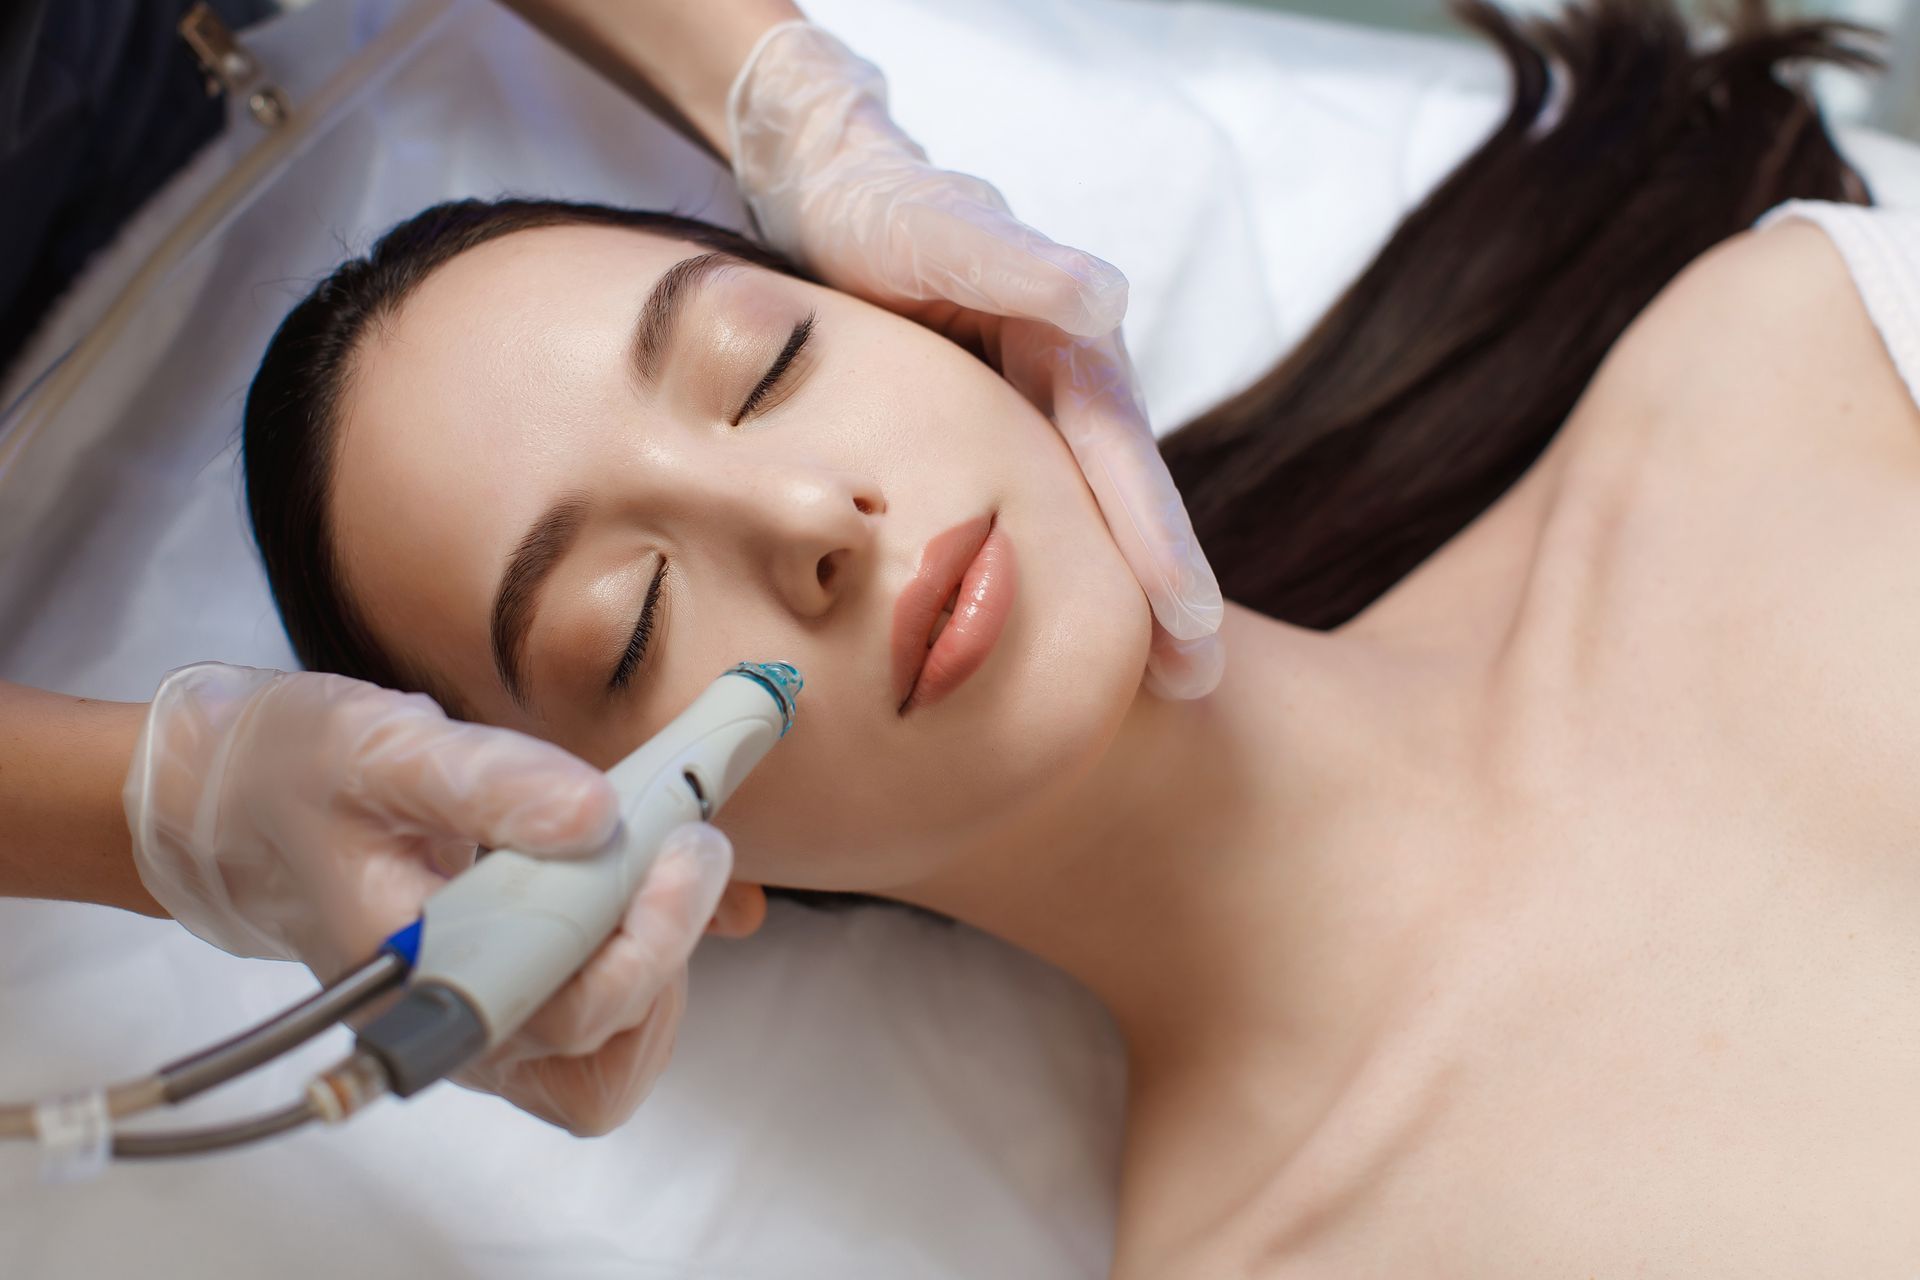 a woman is getting a facial treatment with her eyes closed